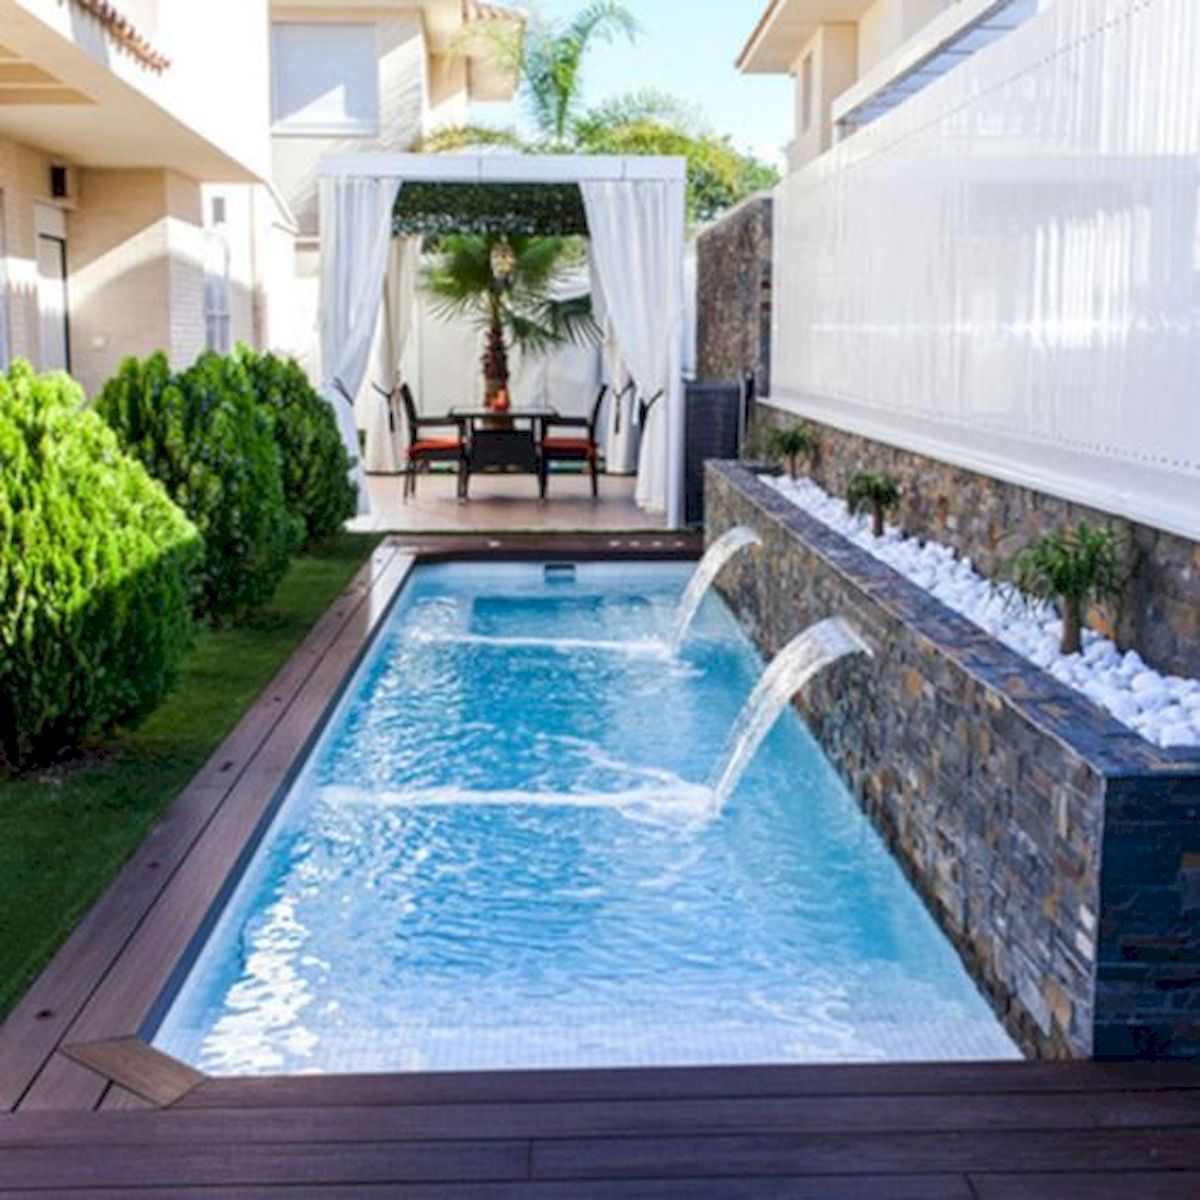 50 Gorgeous Small Swimming Pool Ideas for Small Backyard (16)